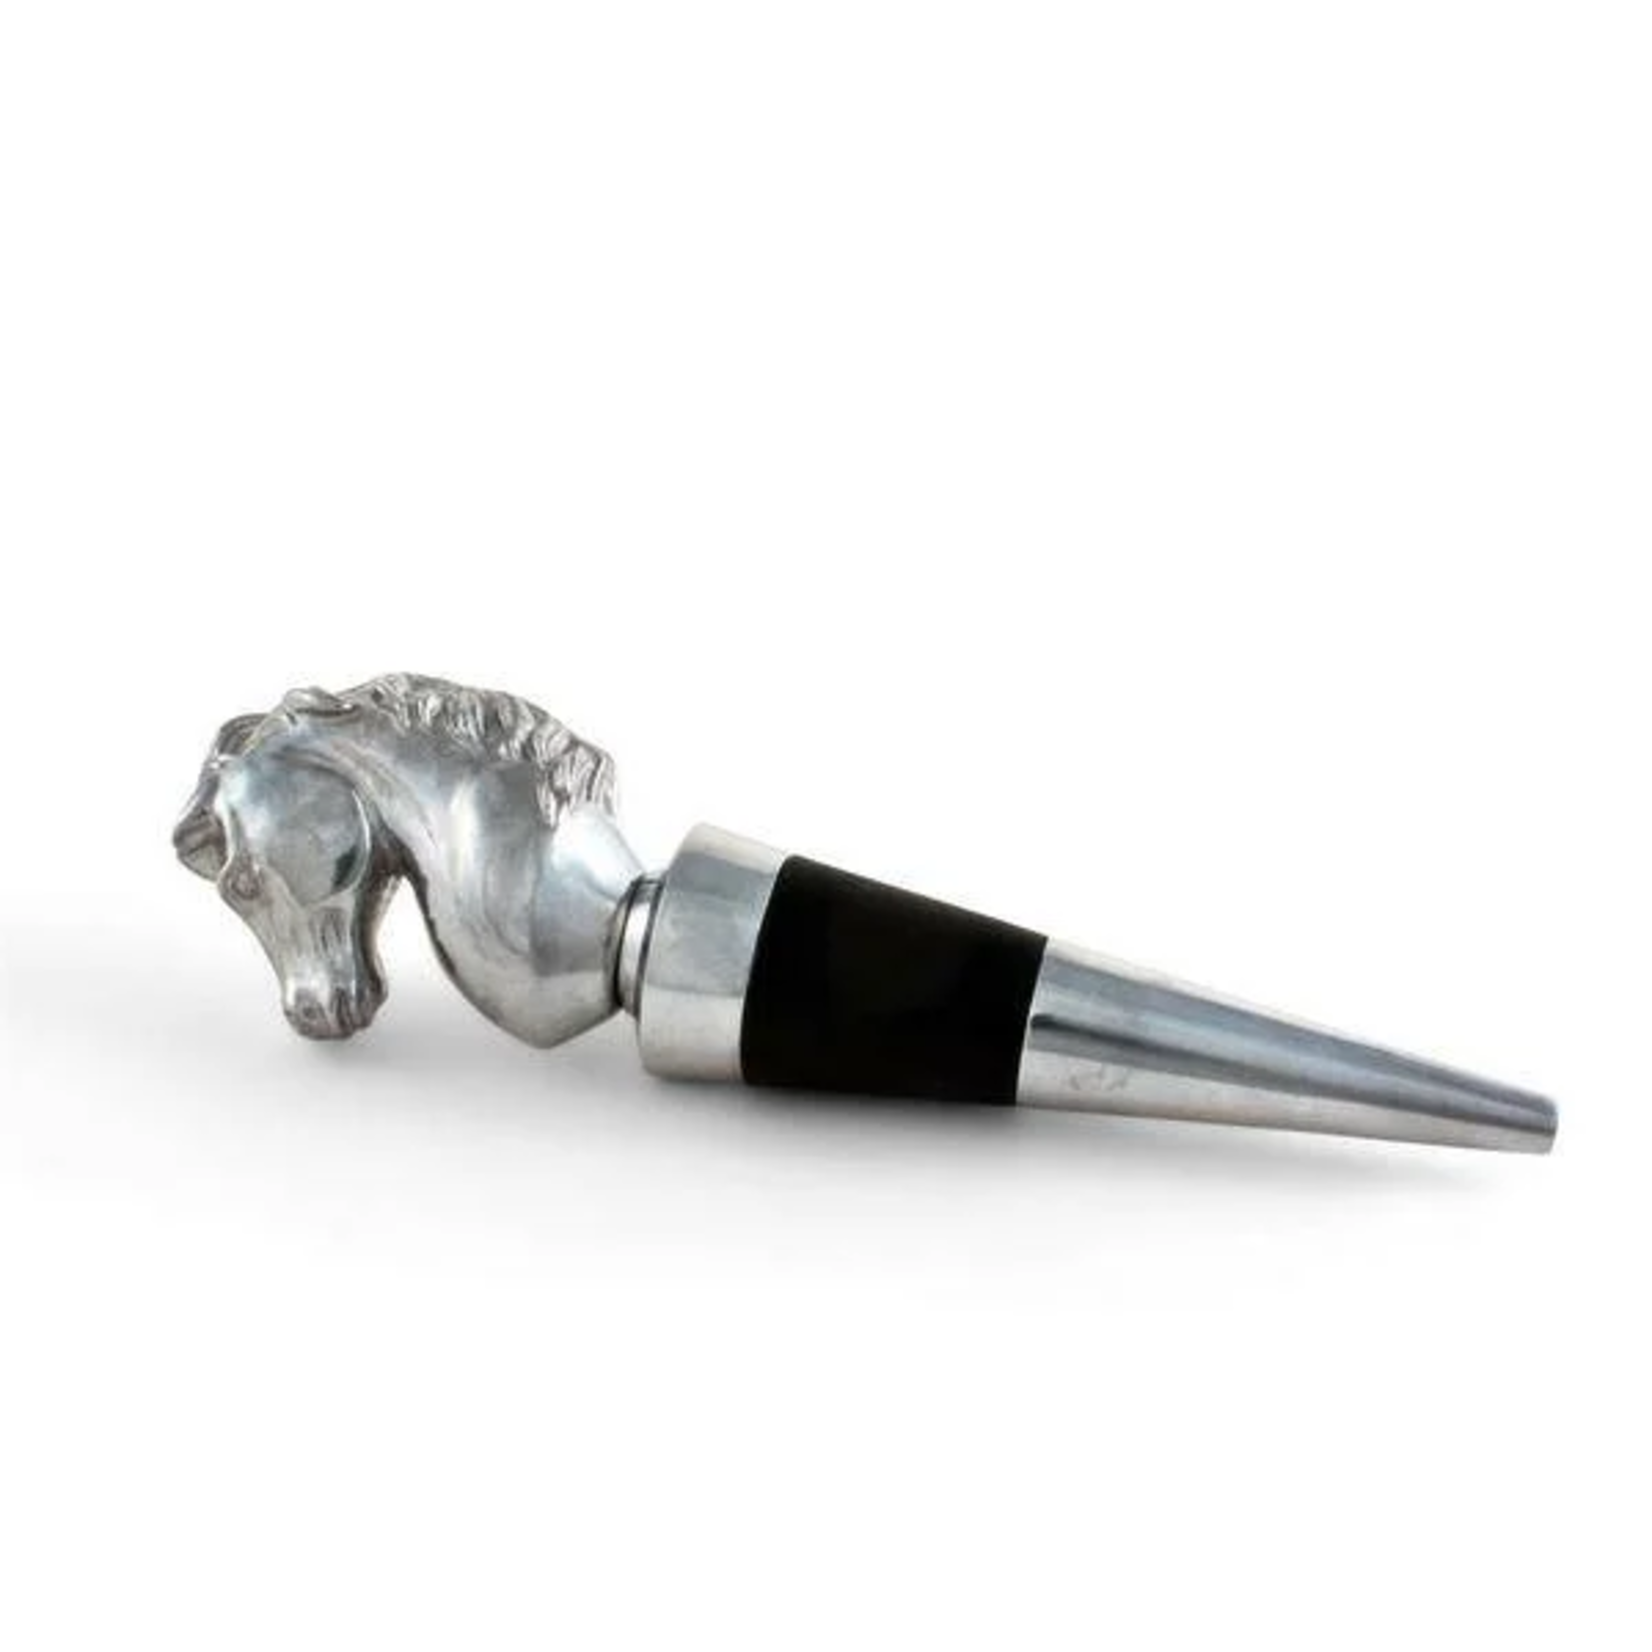 Horses and Lifestyle Equestrian horse bottle stopper